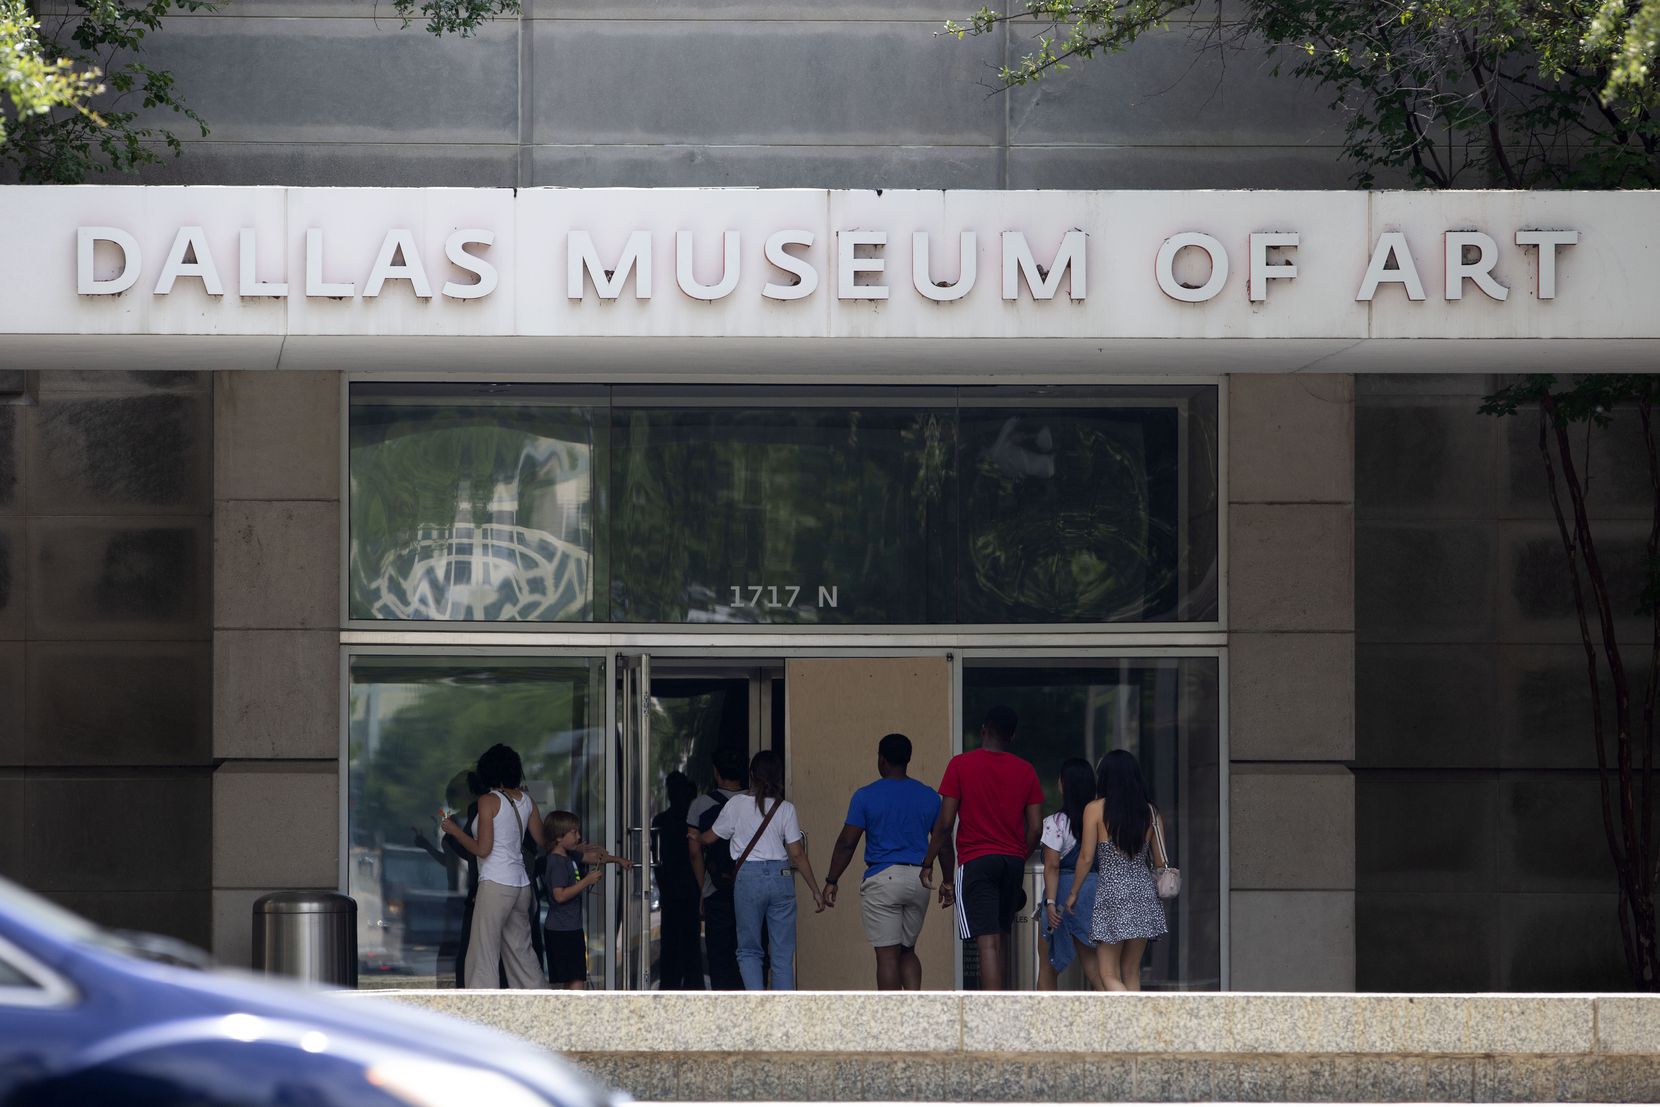 The outside entrance of the Dallas Museum of Art that was broken into on June 1 revealed...